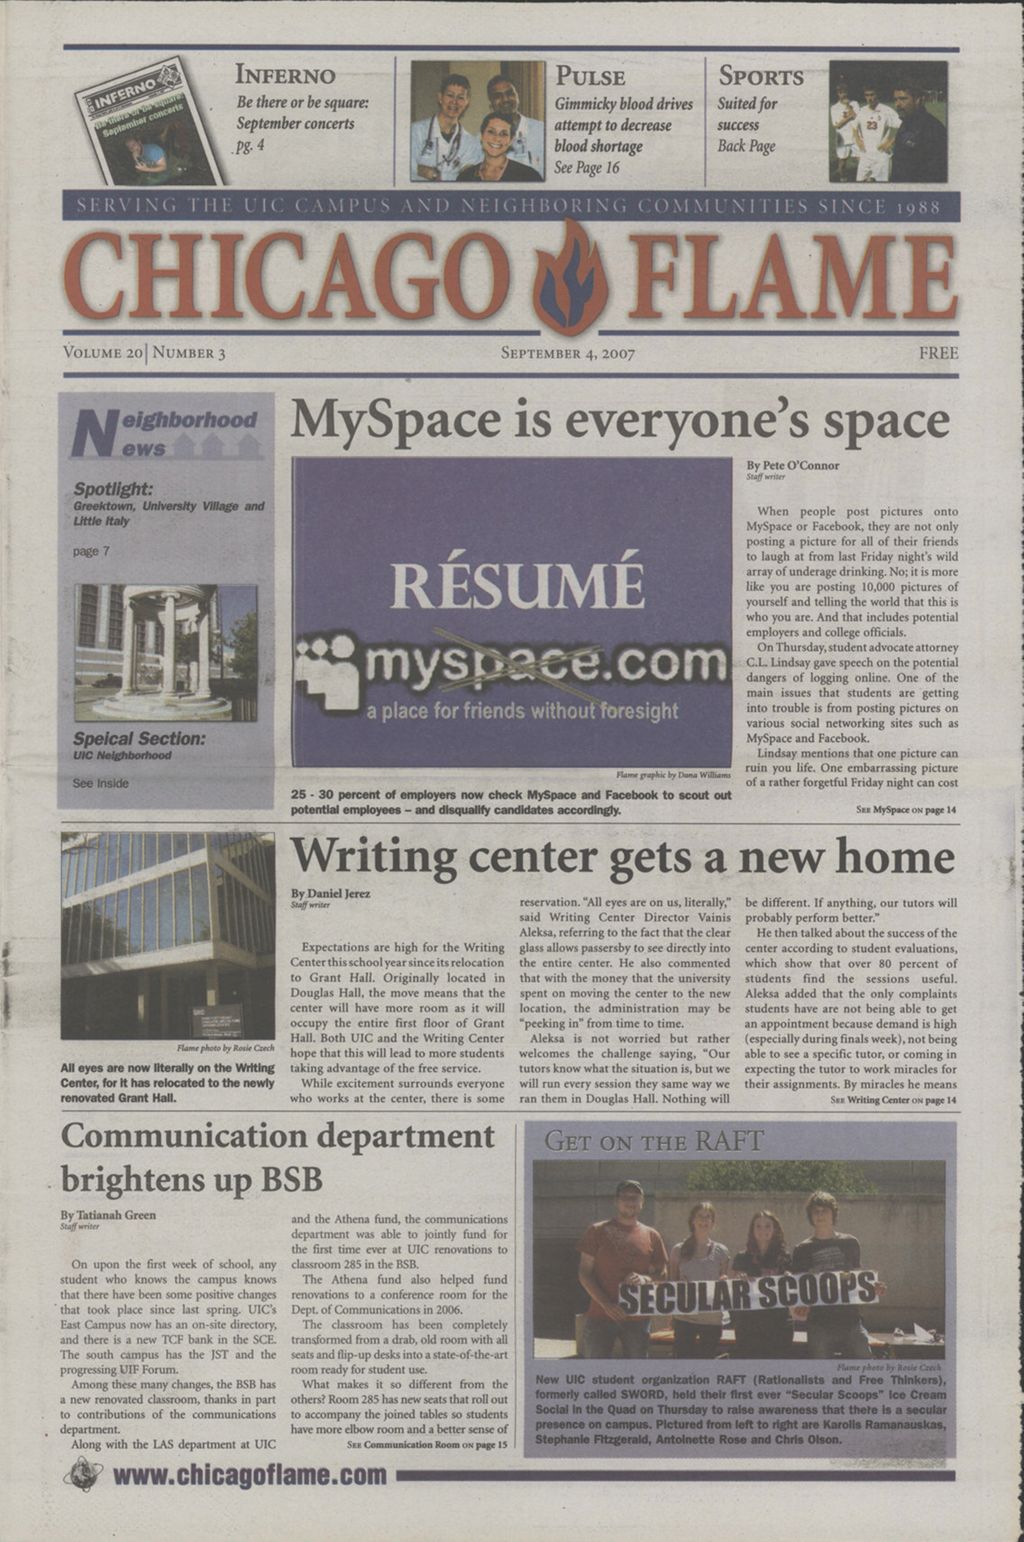 Miniature of Chicago Flame (September 4, 2007)